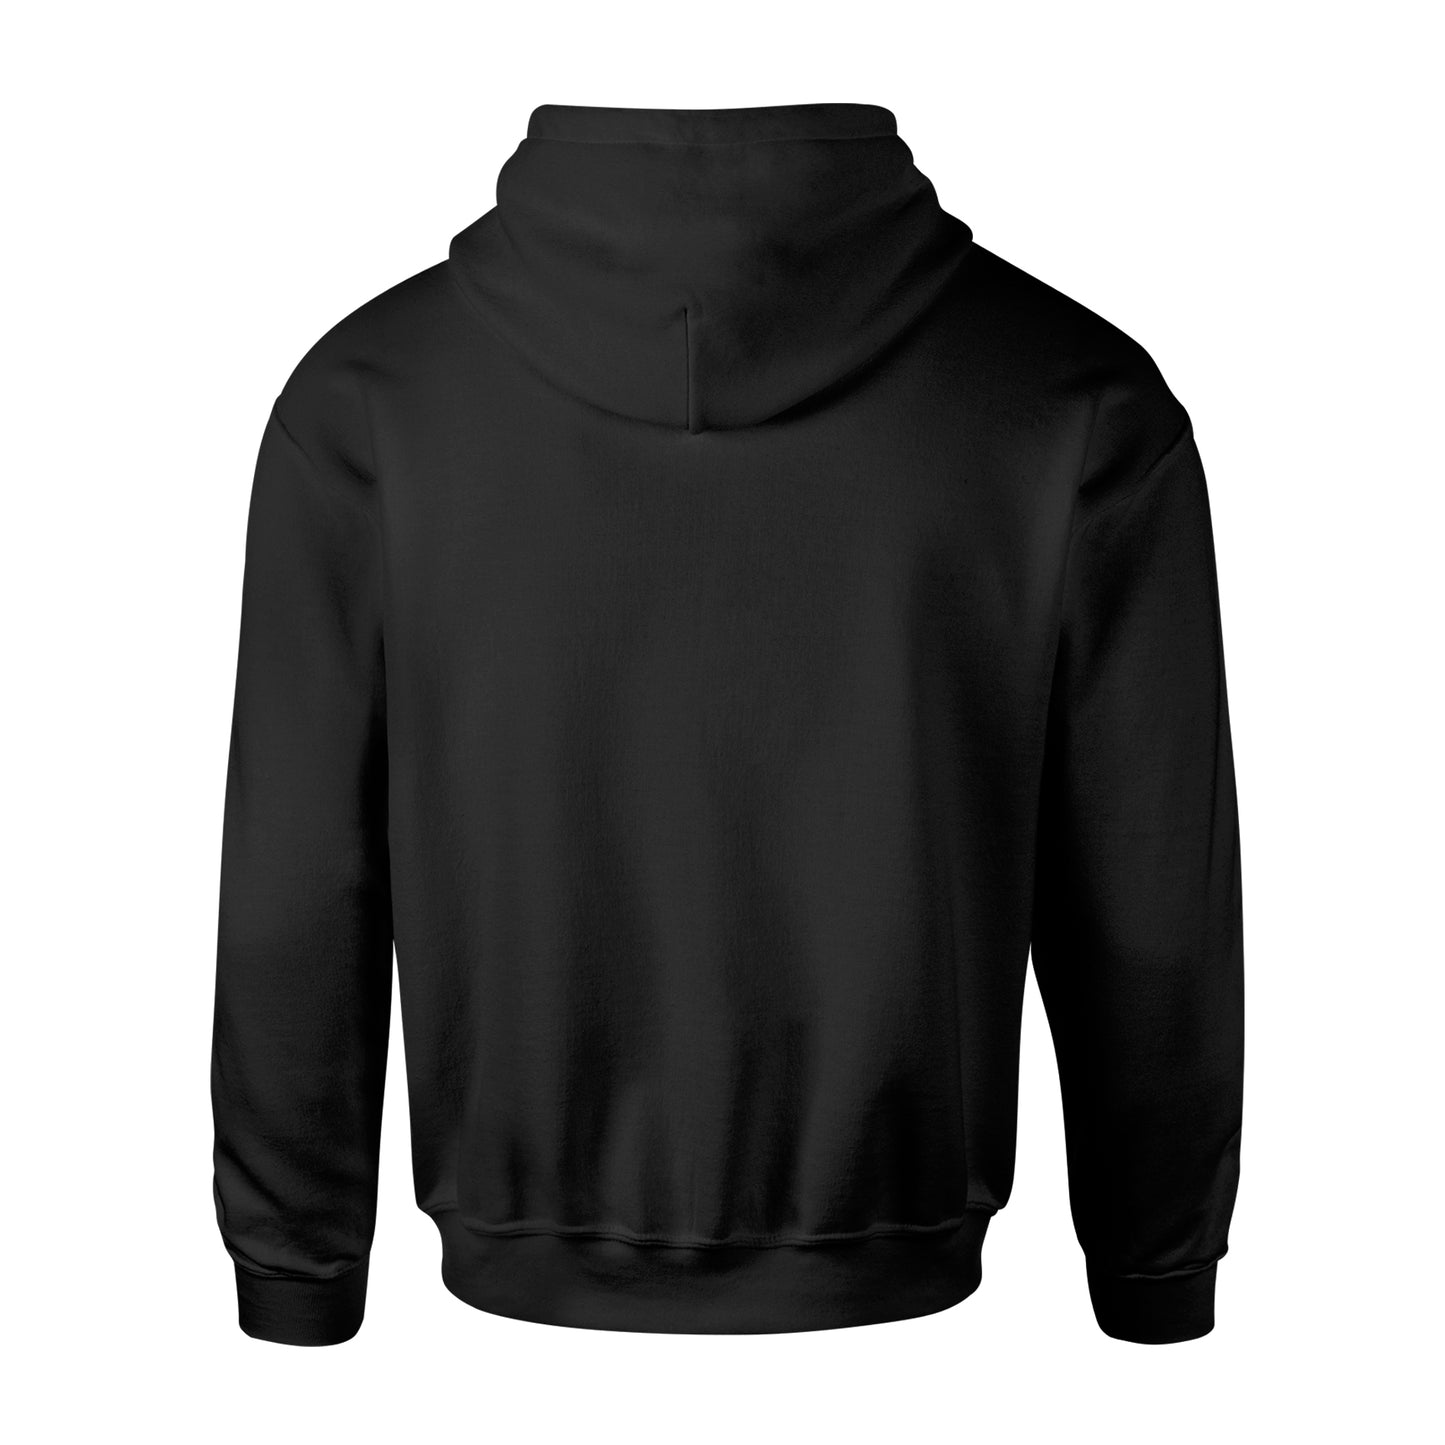 Just One More Biblend Hoodie - Youth